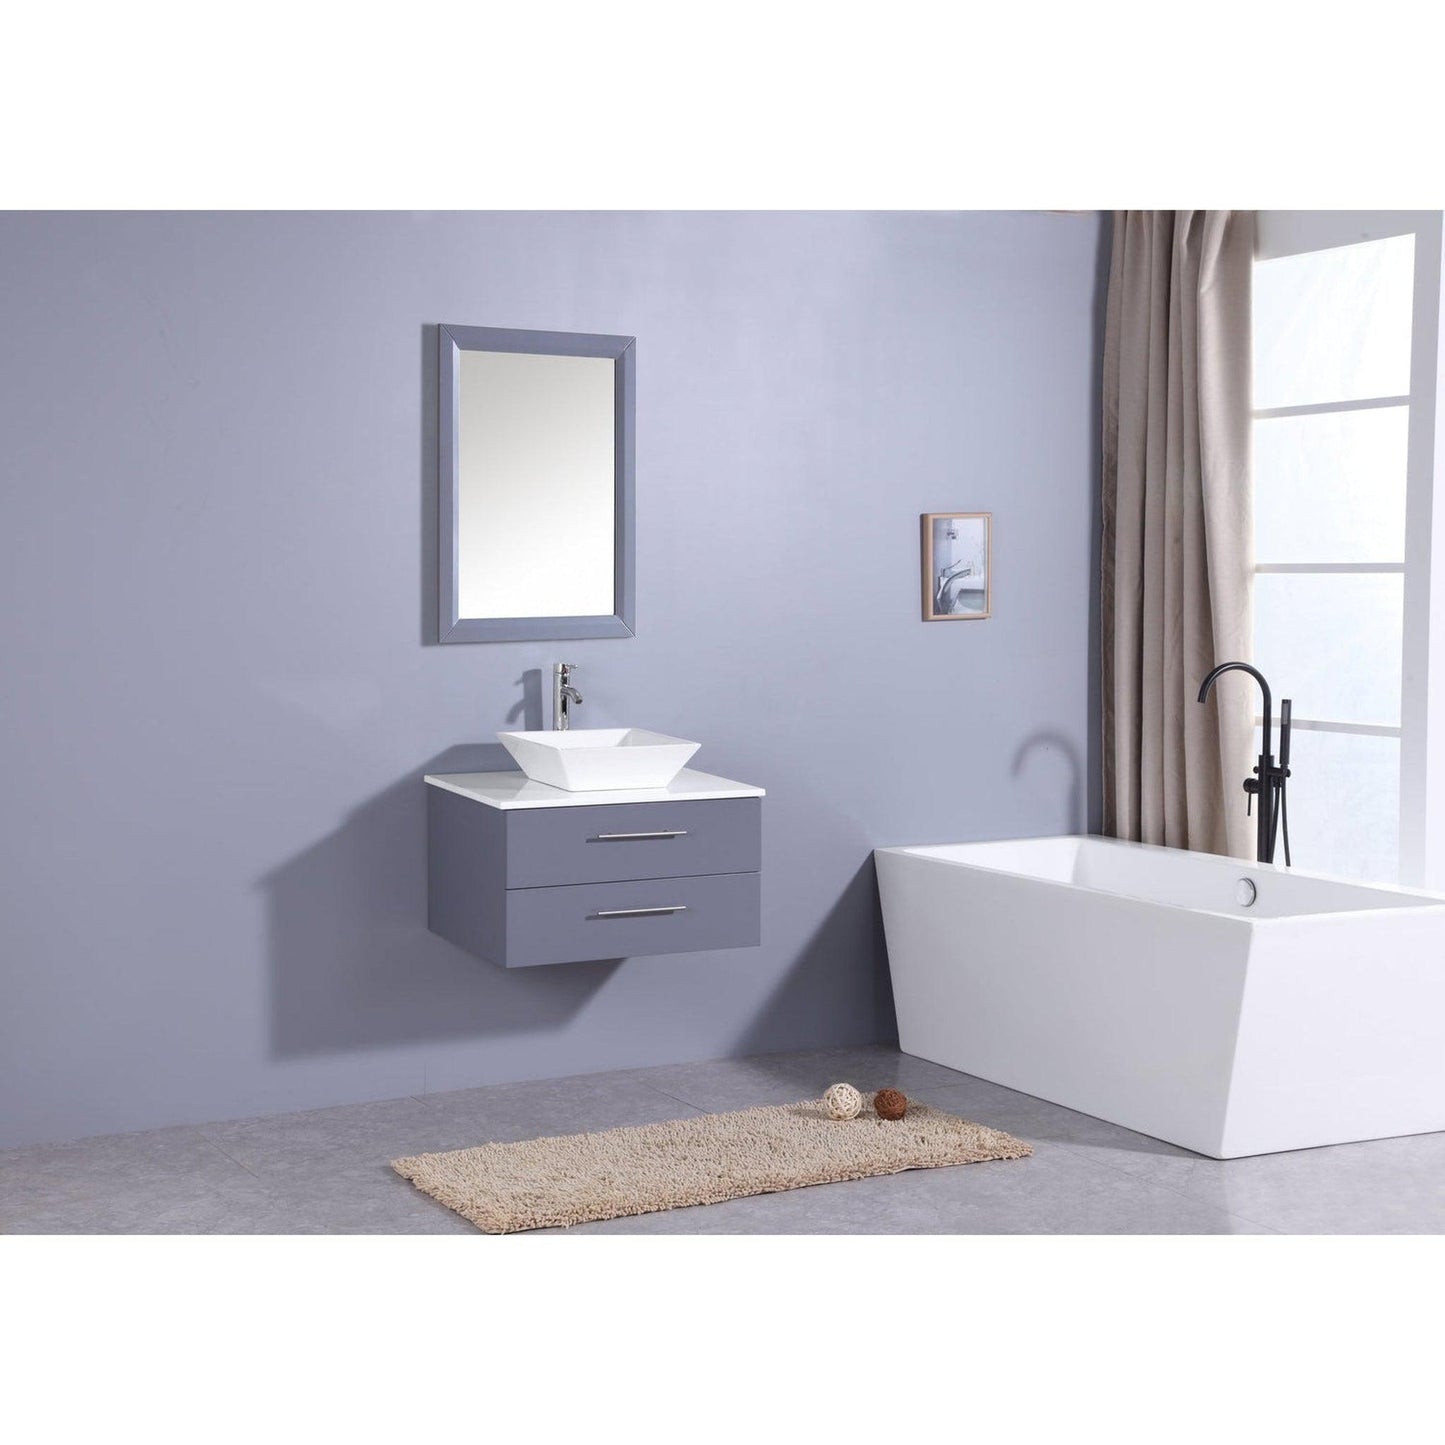 Eviva Totti Wave 24" x 16" Gray Wall-Mounted Bathroom Vanity With White Man-Made Stone Countertop and Single Porcelain Sink